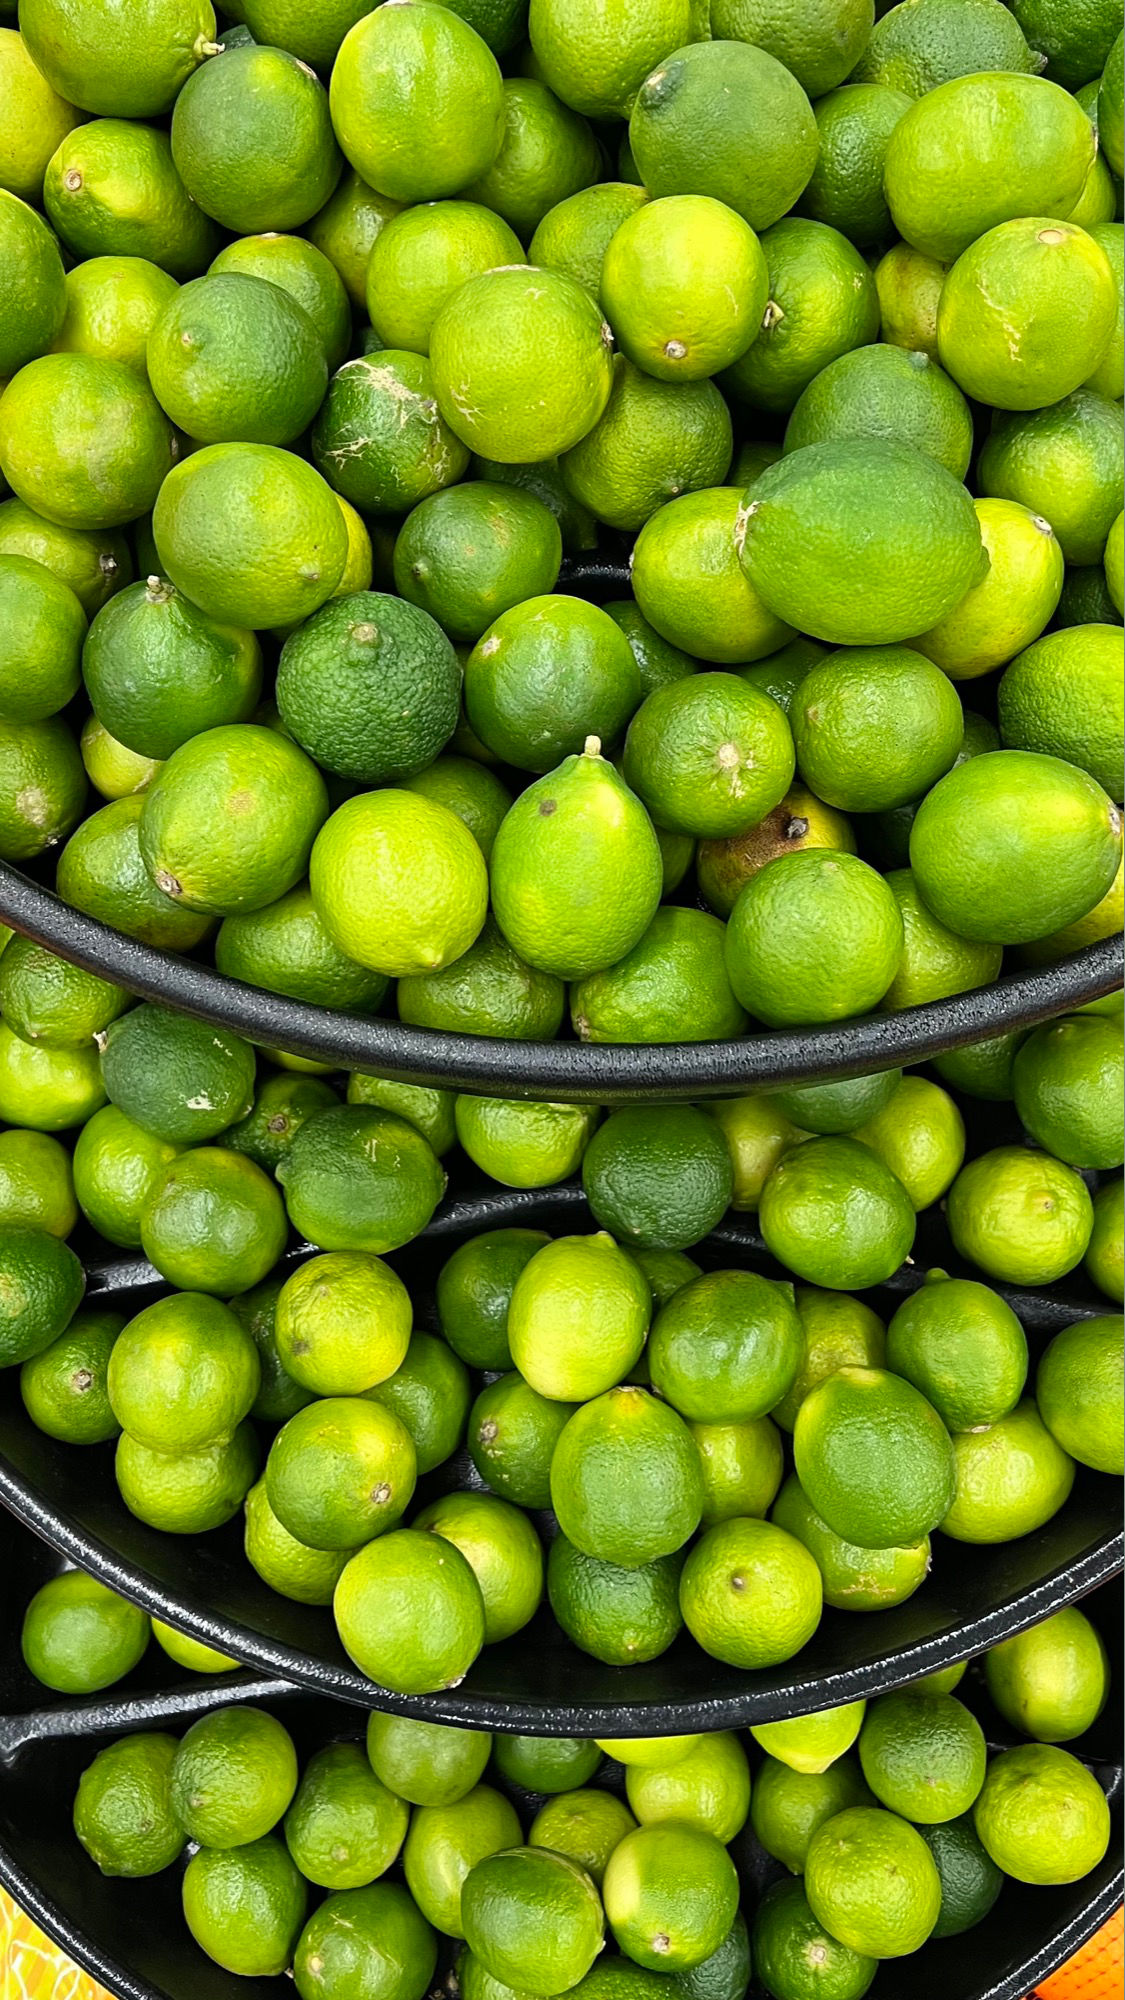 Grocery Store Limes